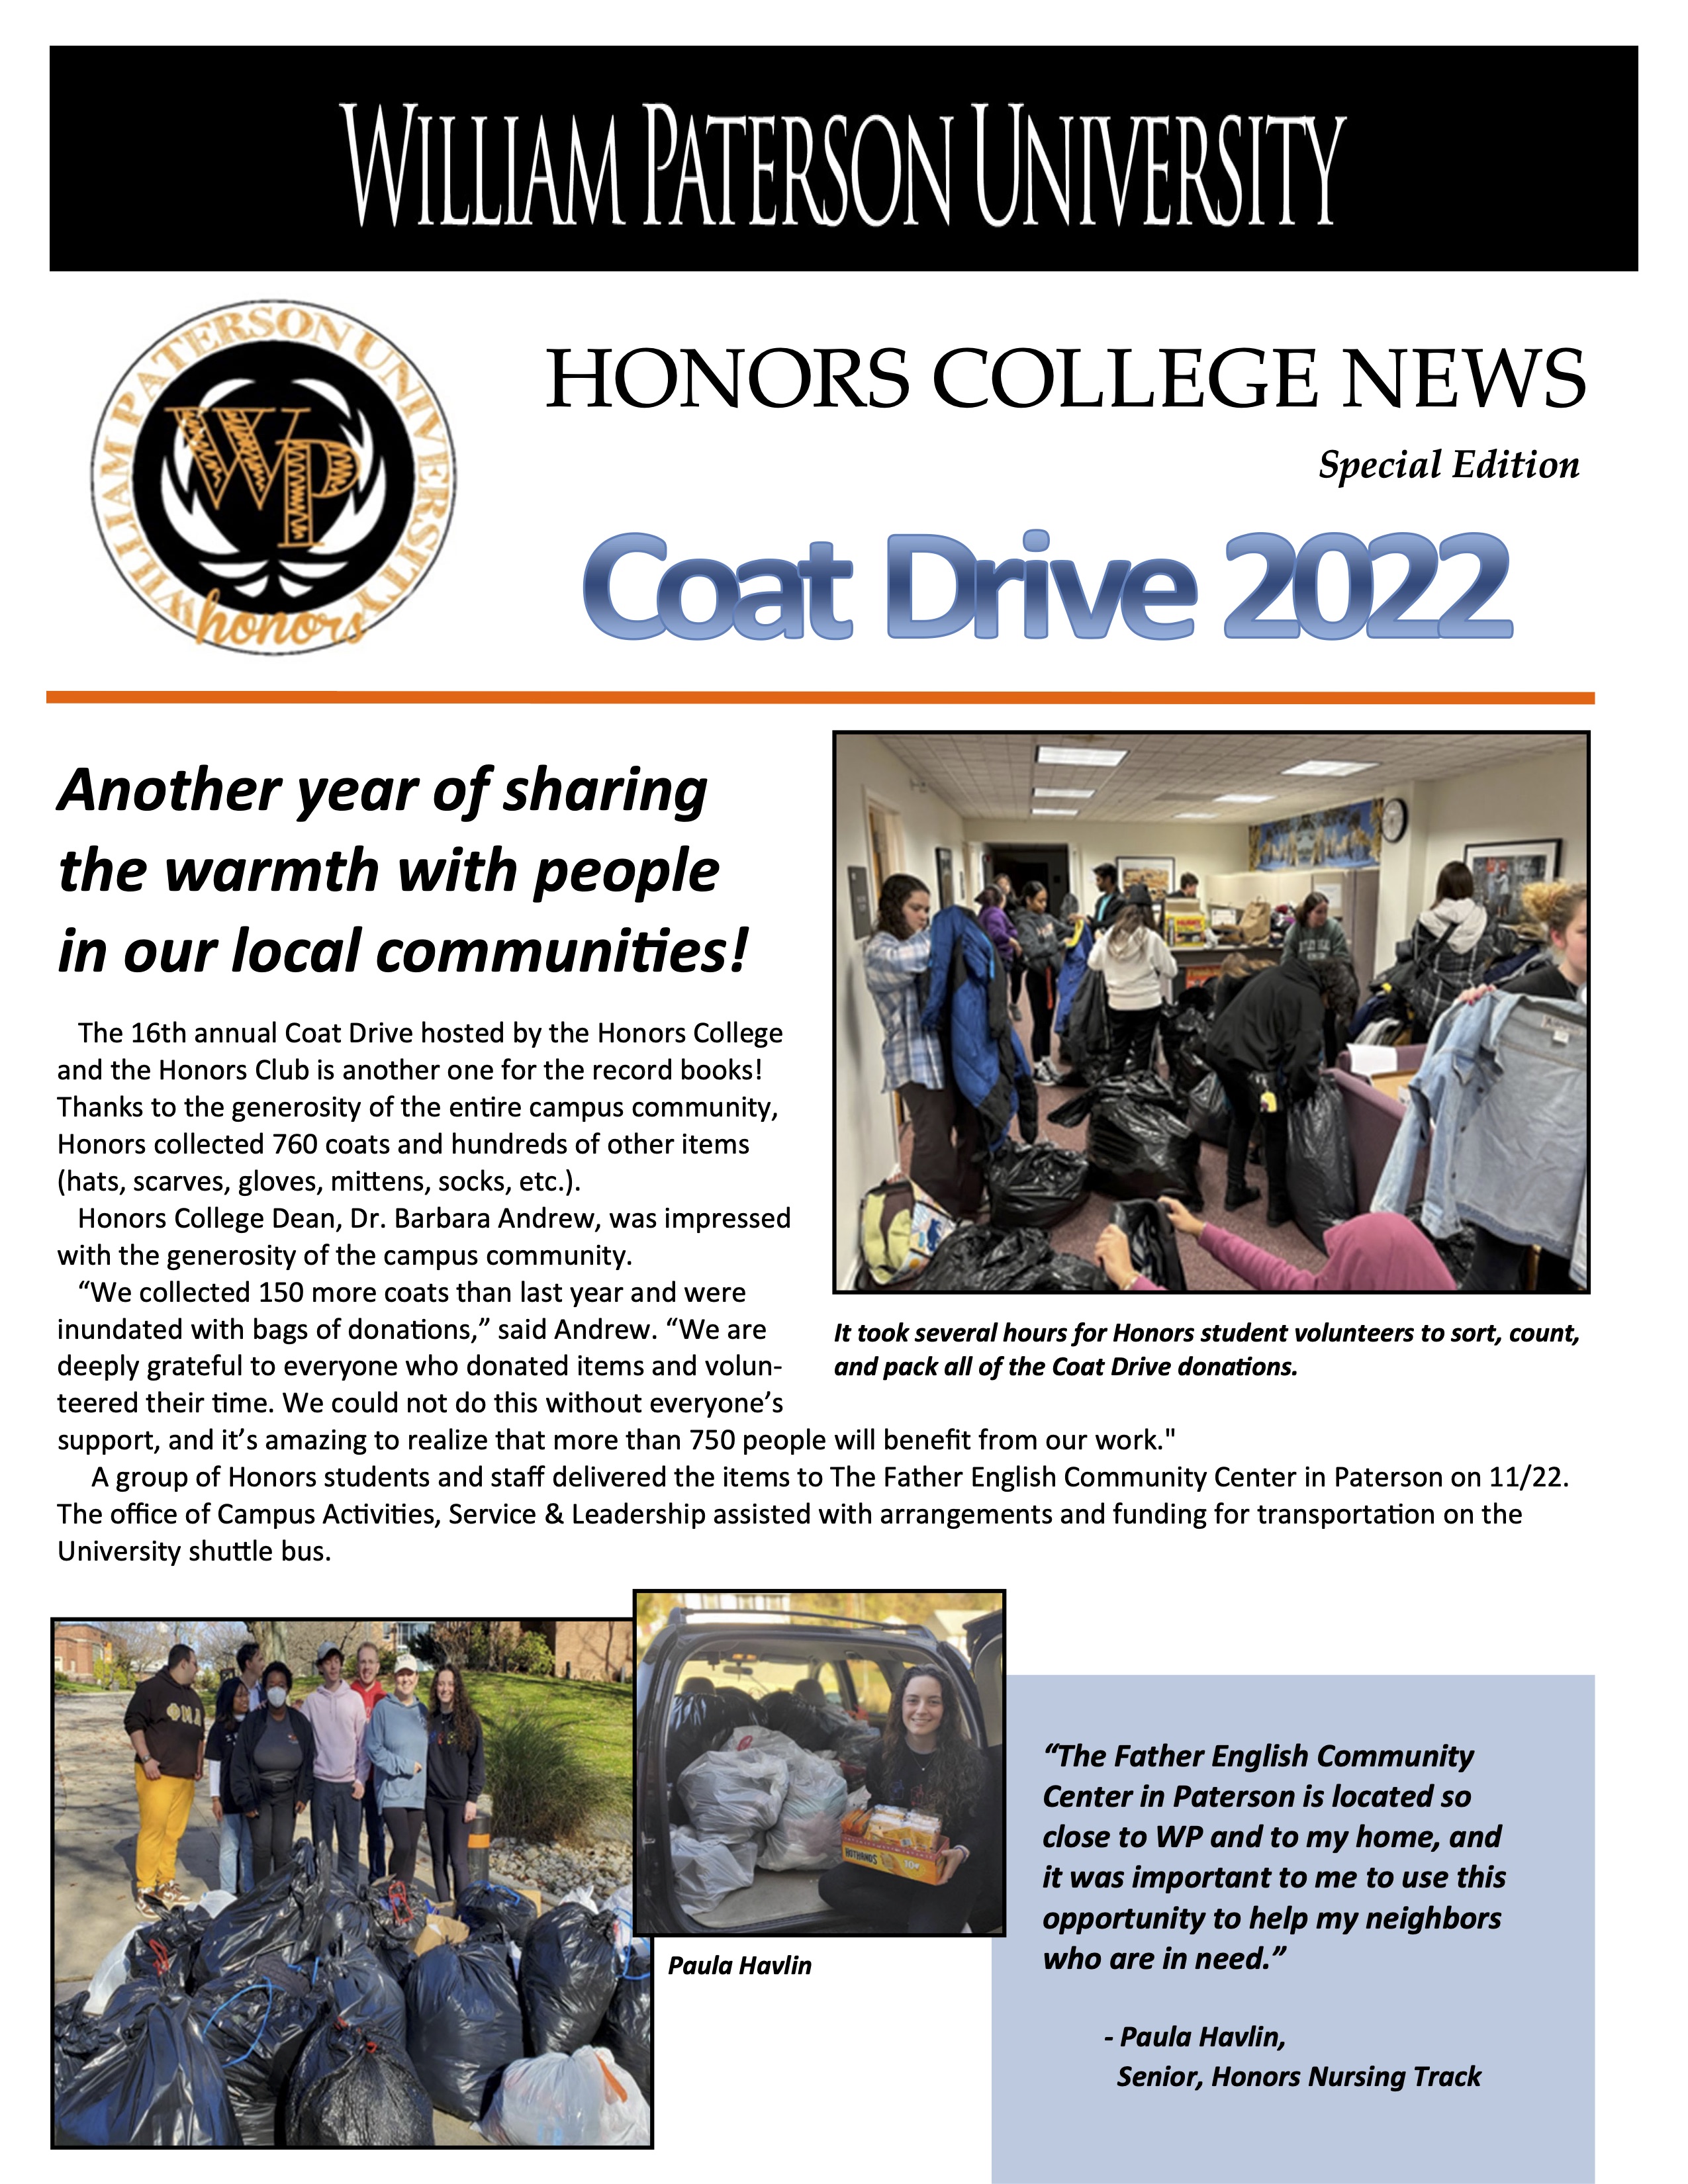 Special-Edition-Coat-Drive-2022.jpg